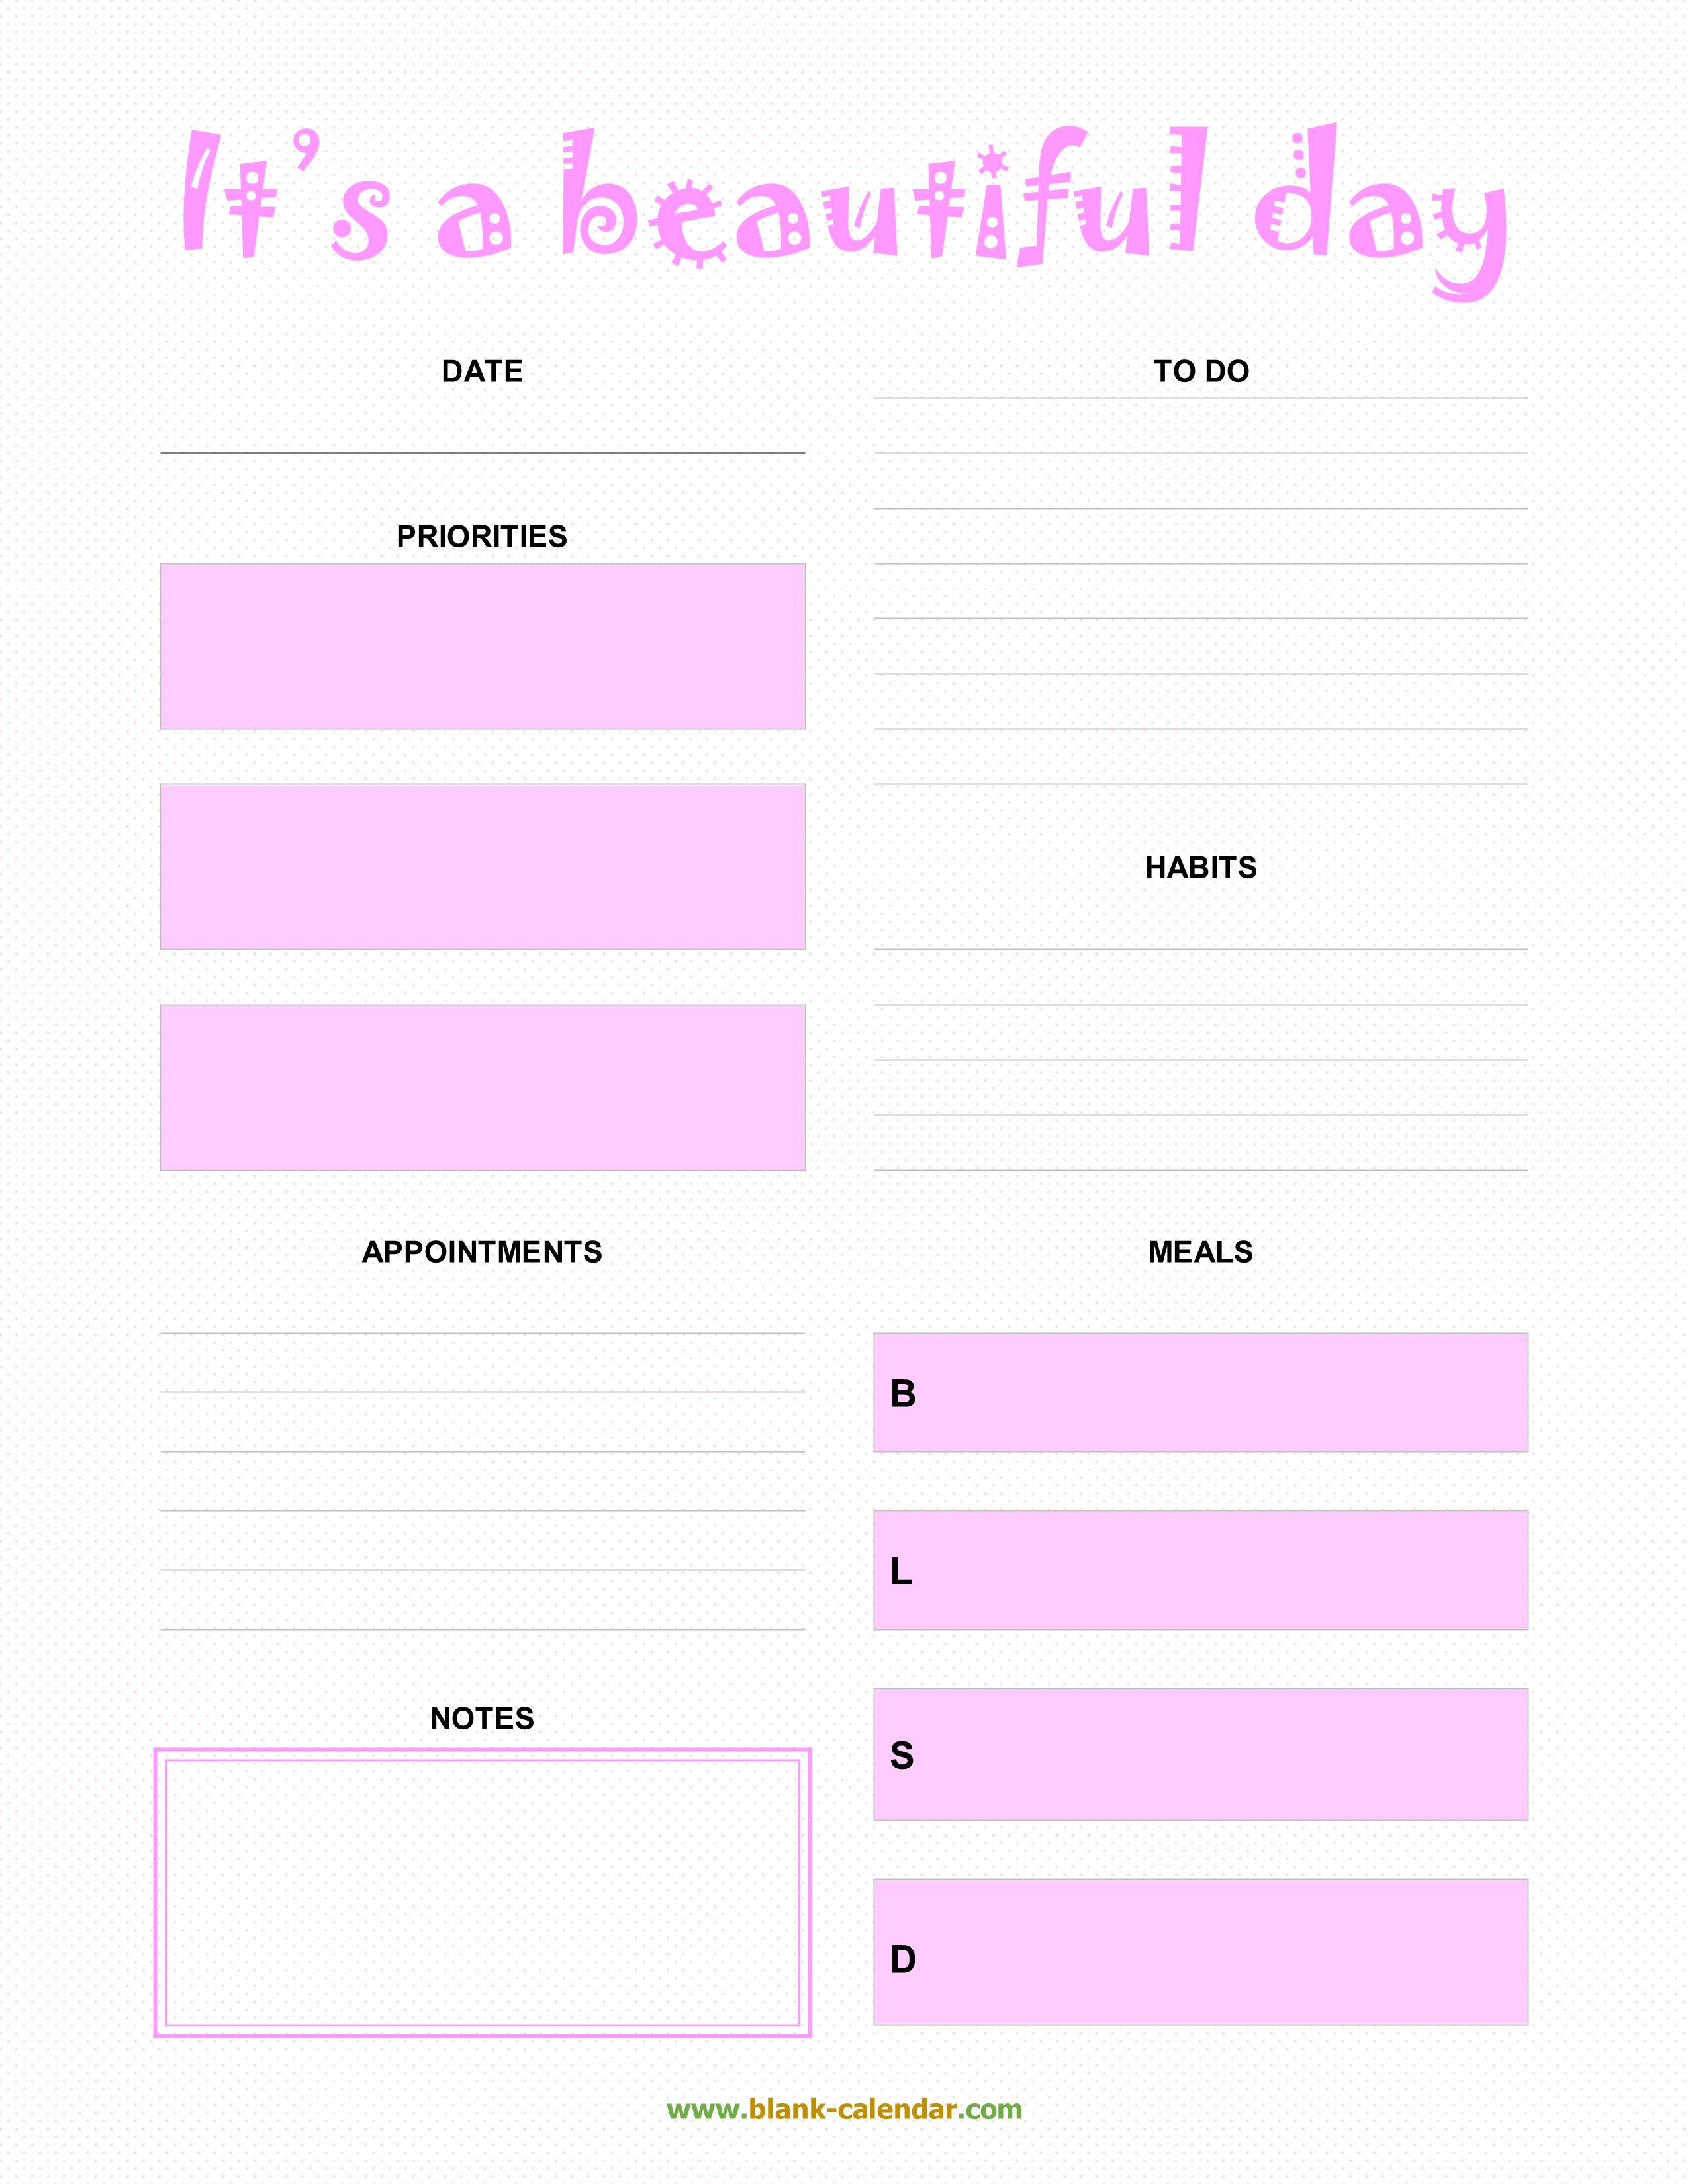 Printable Daily Planner Templates Free In Wordexcelpdf Inside Images